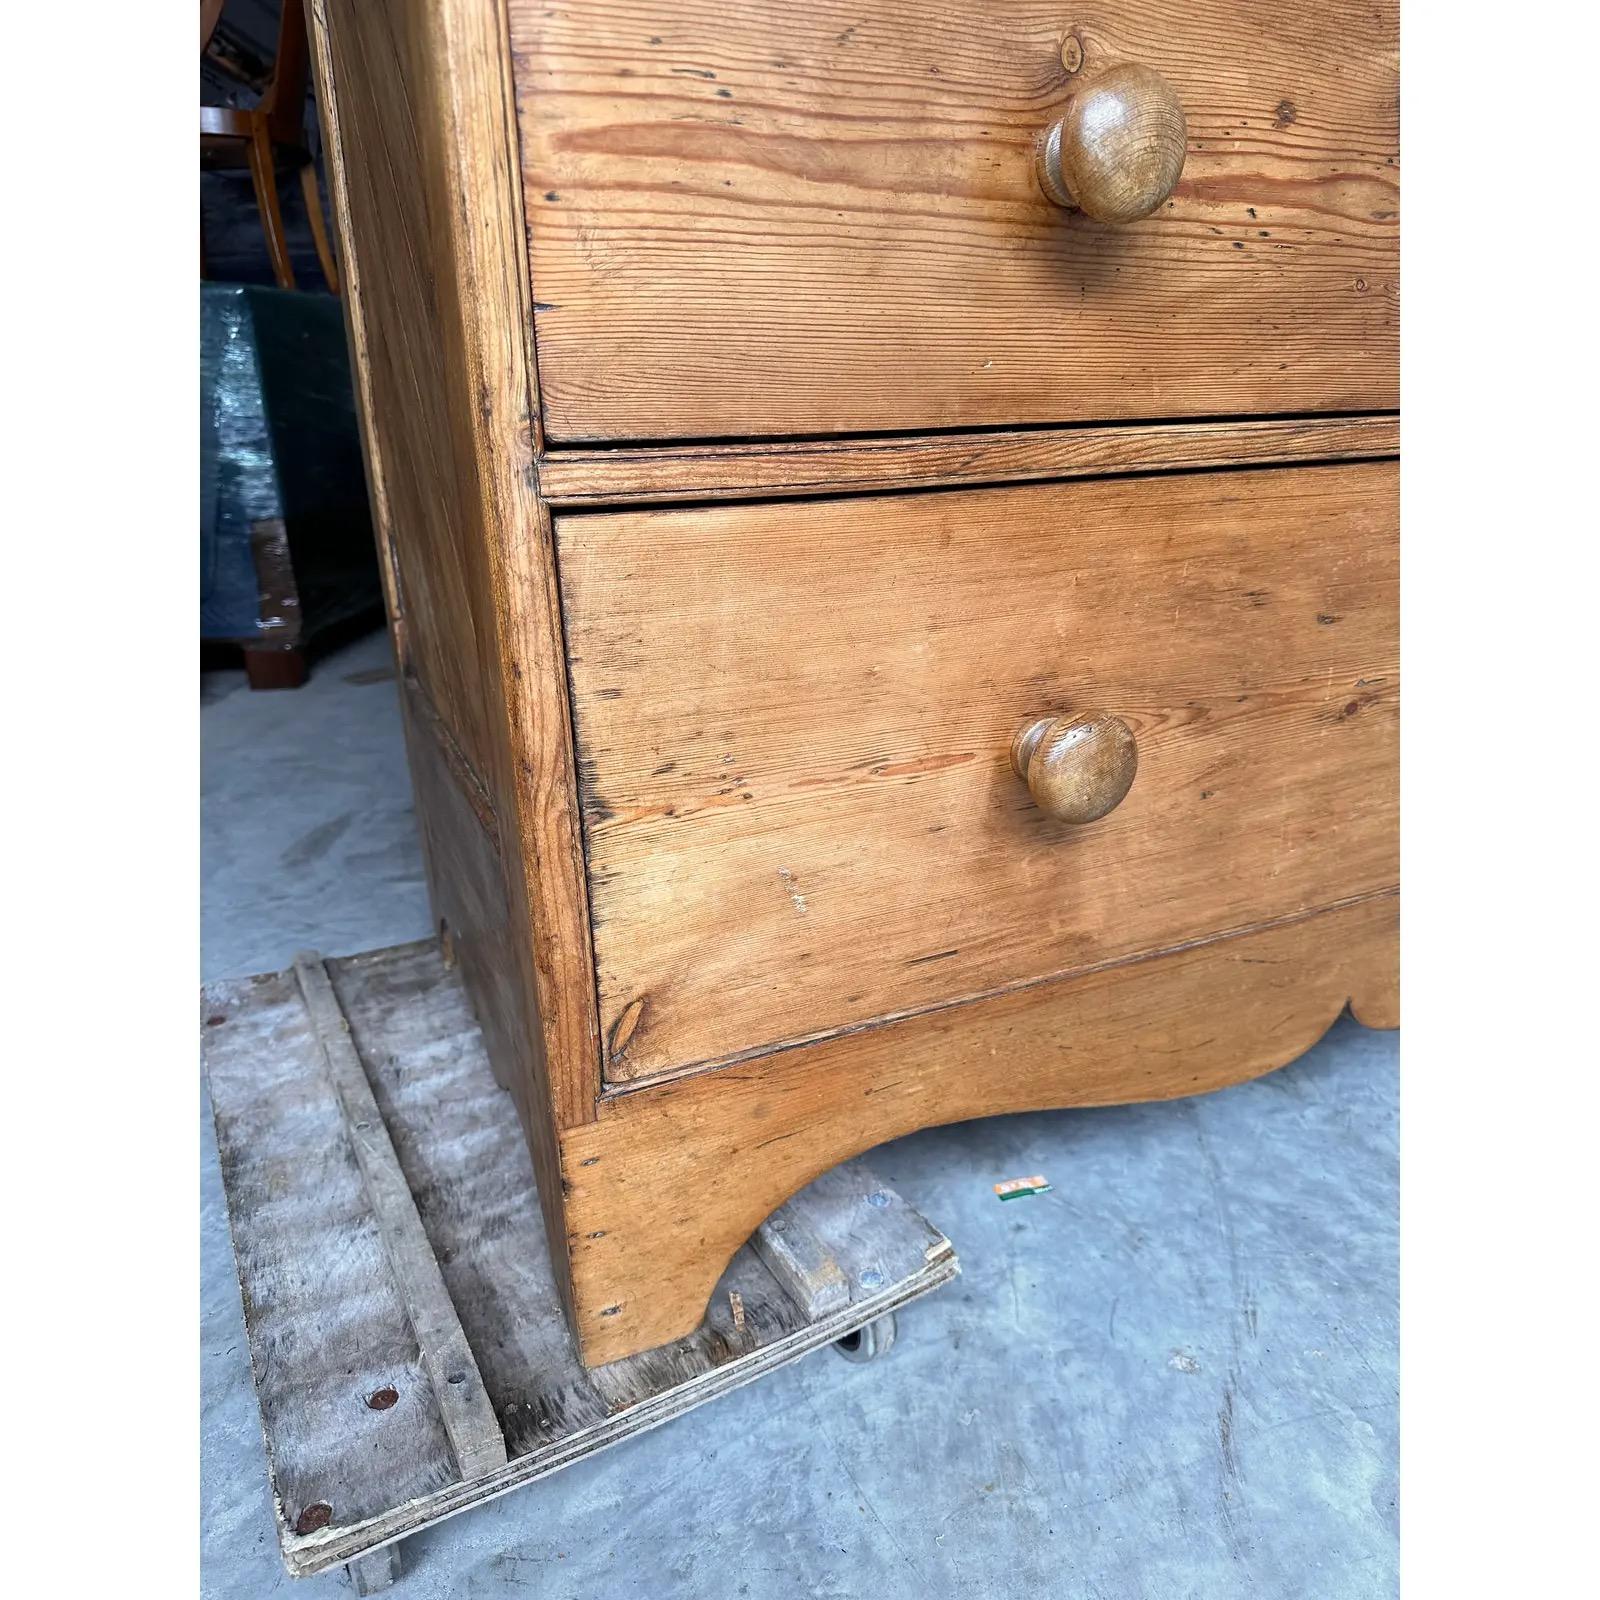 This is a lovely antique Two over three English pine chest! Larger in size than normal this piece has a real presence noticed the sides they're so unusual I've never seen this on an English pine chest.This piece dates to the 19th century and has